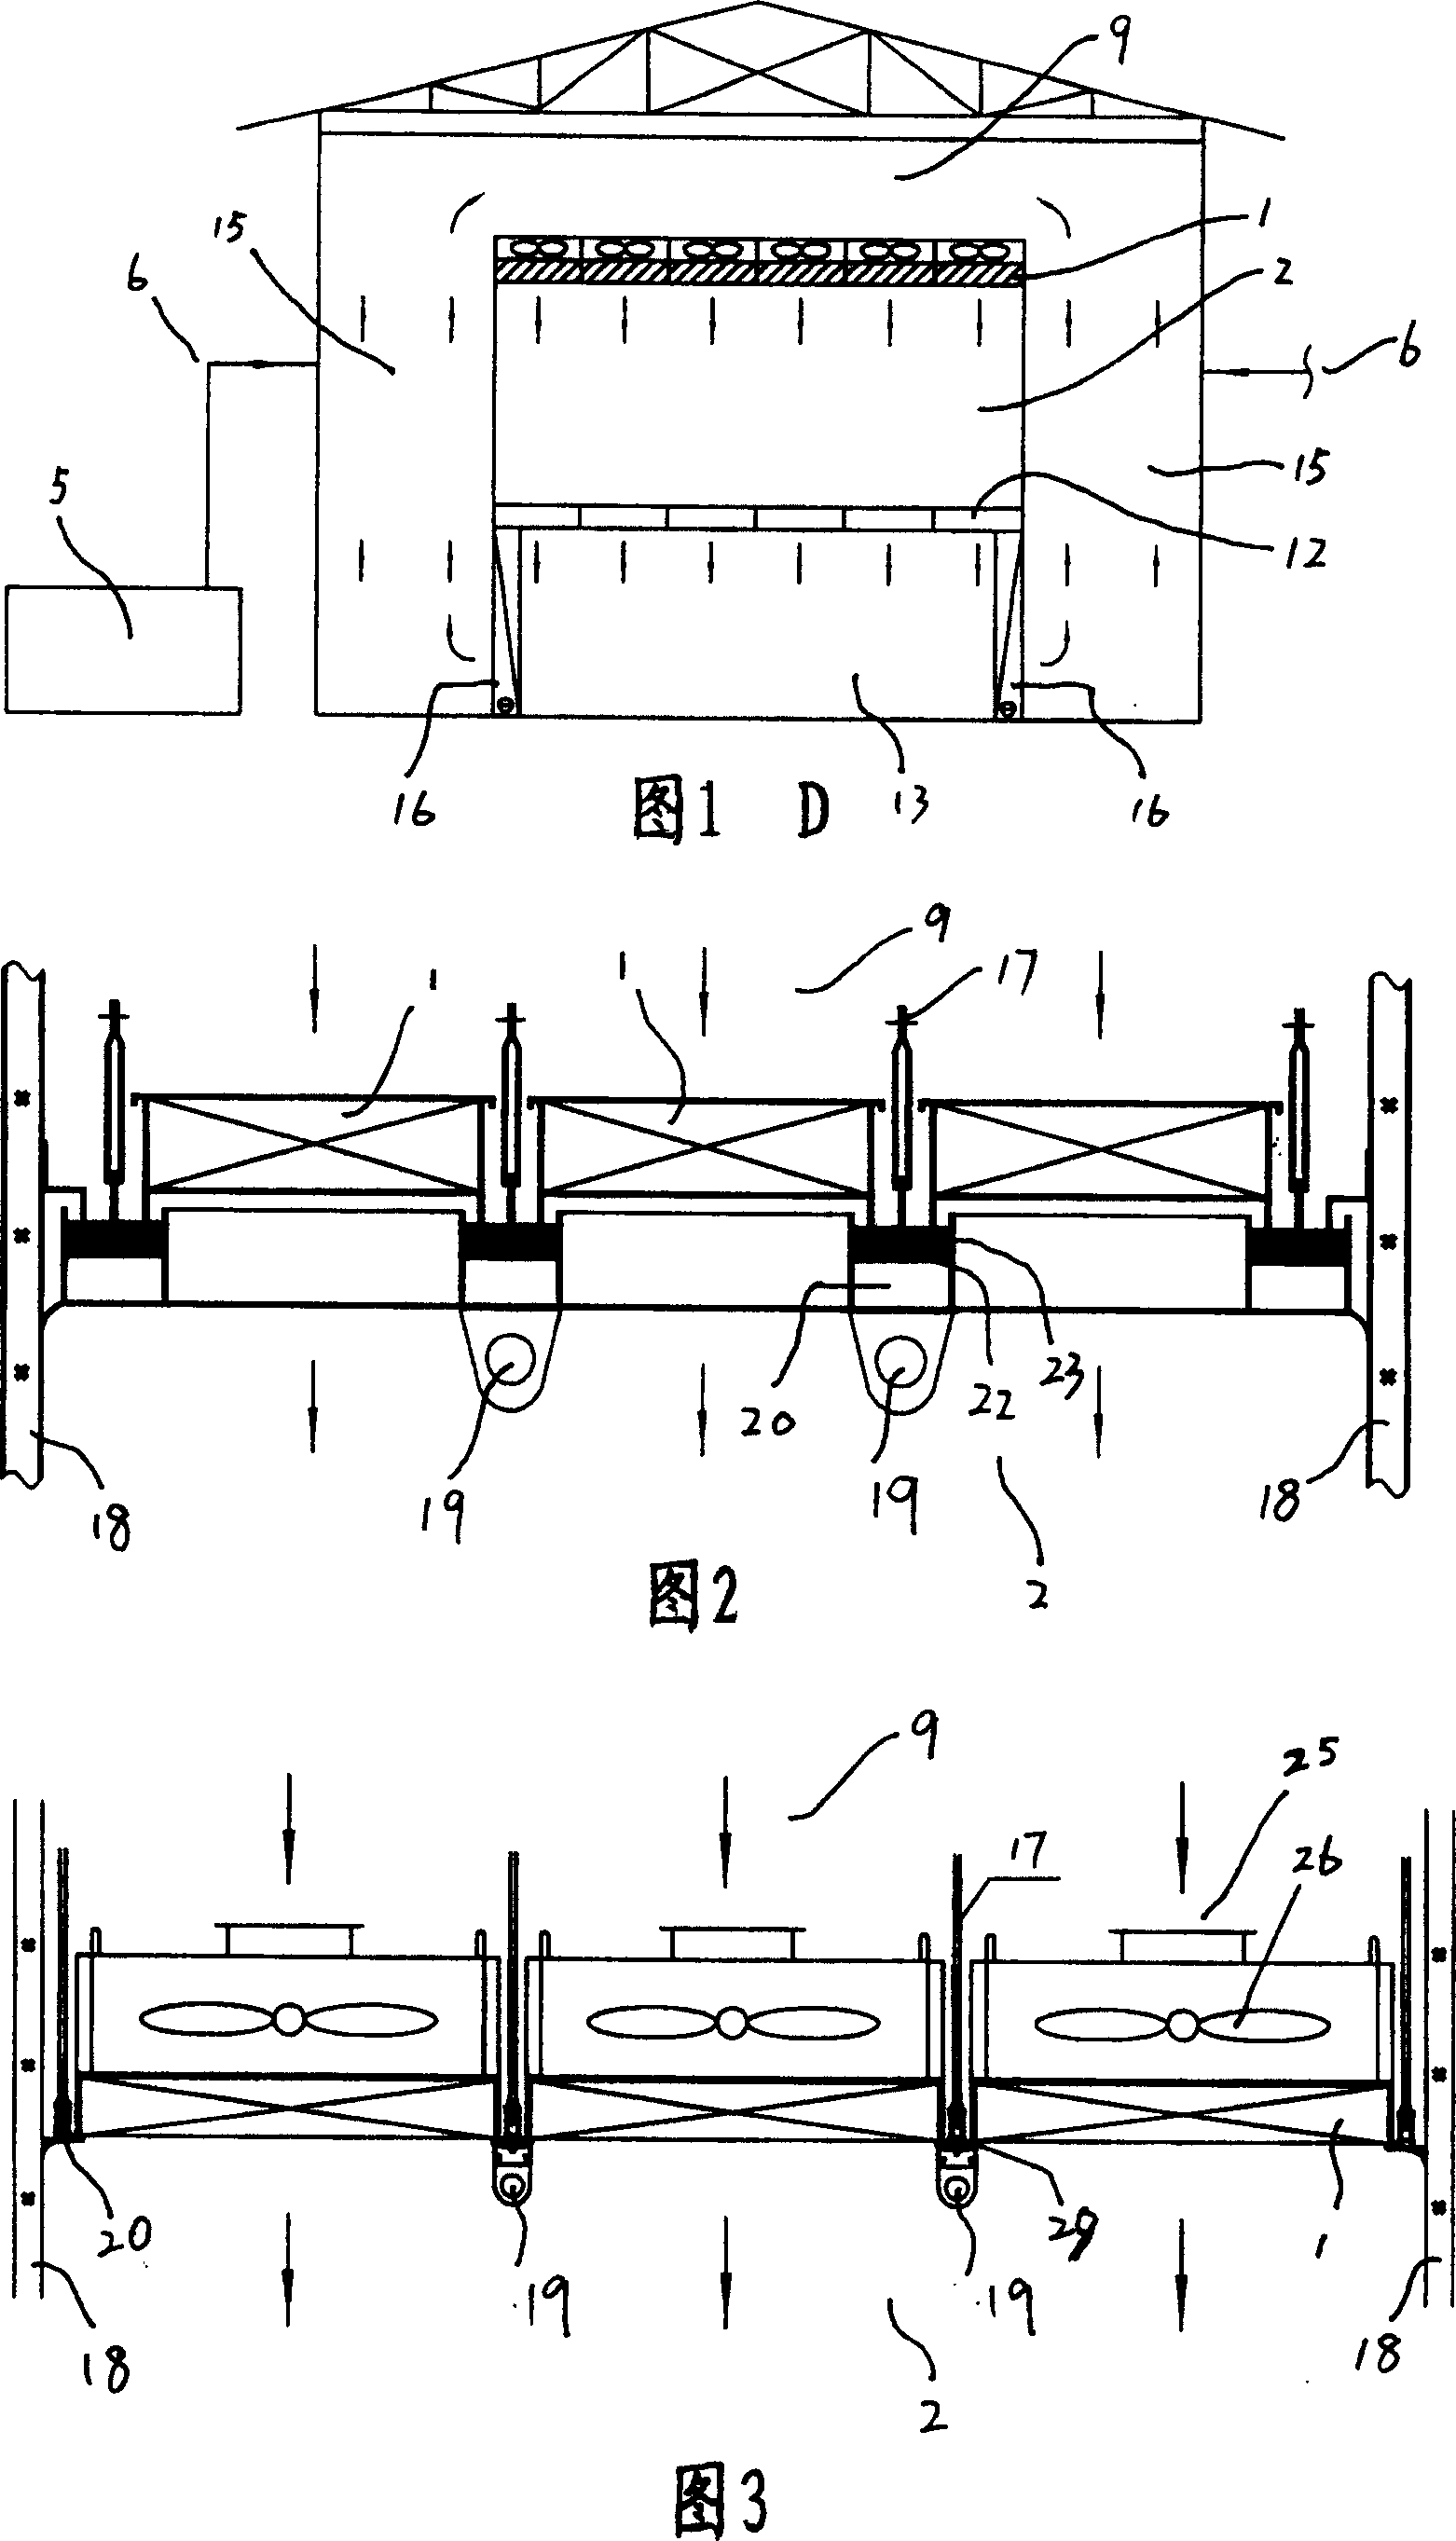 Flow pattern of air conditioning and purifying system in cleaning room